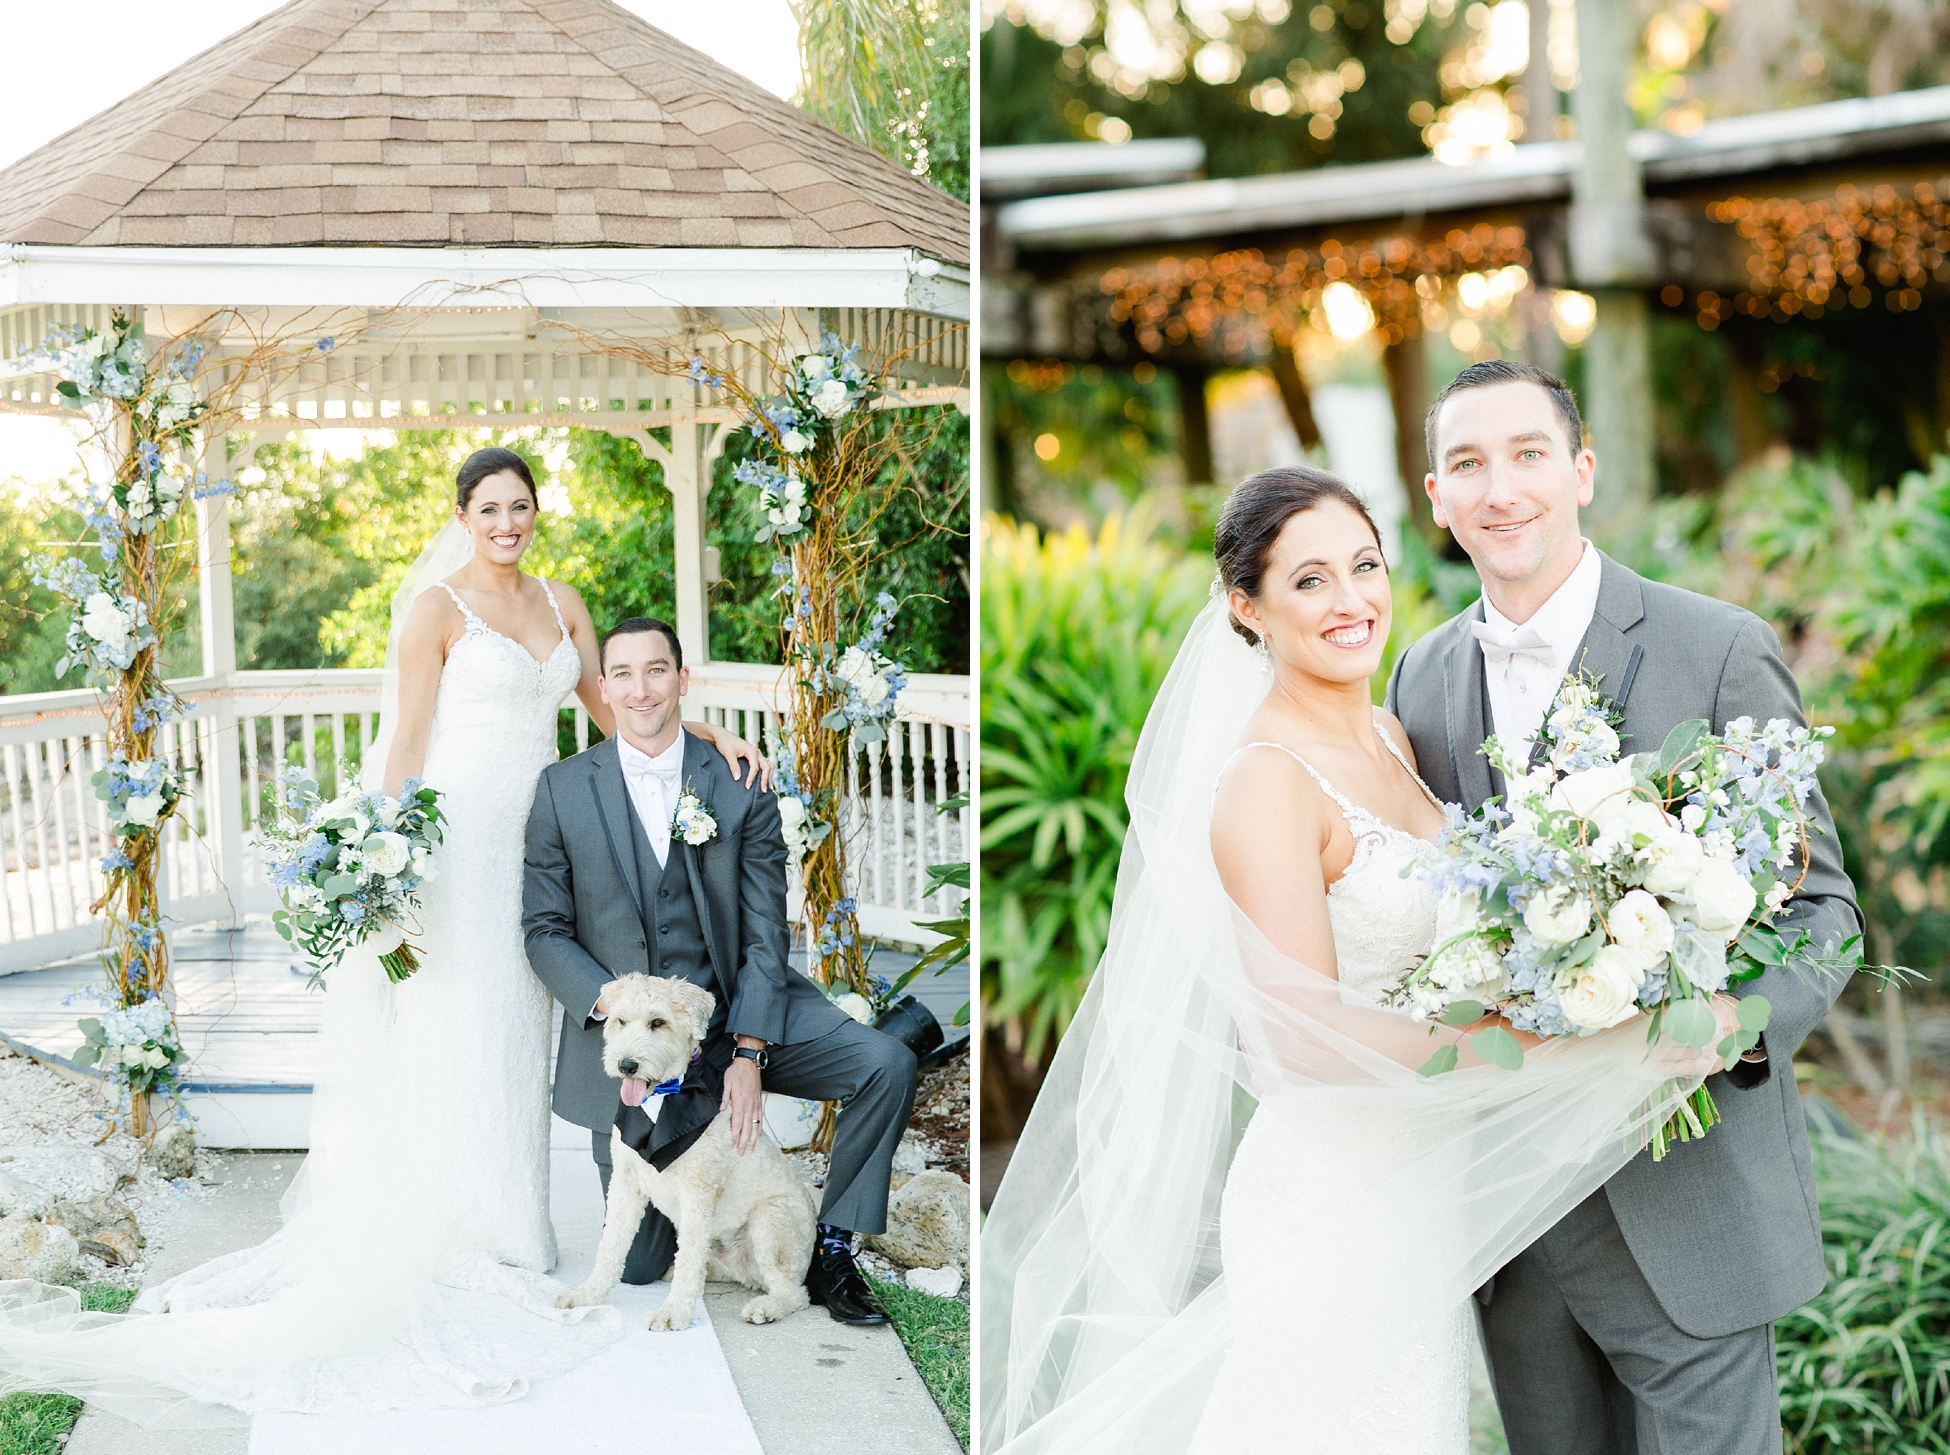 Tampa Wedding | © Ailyn La Torre Photography 2018